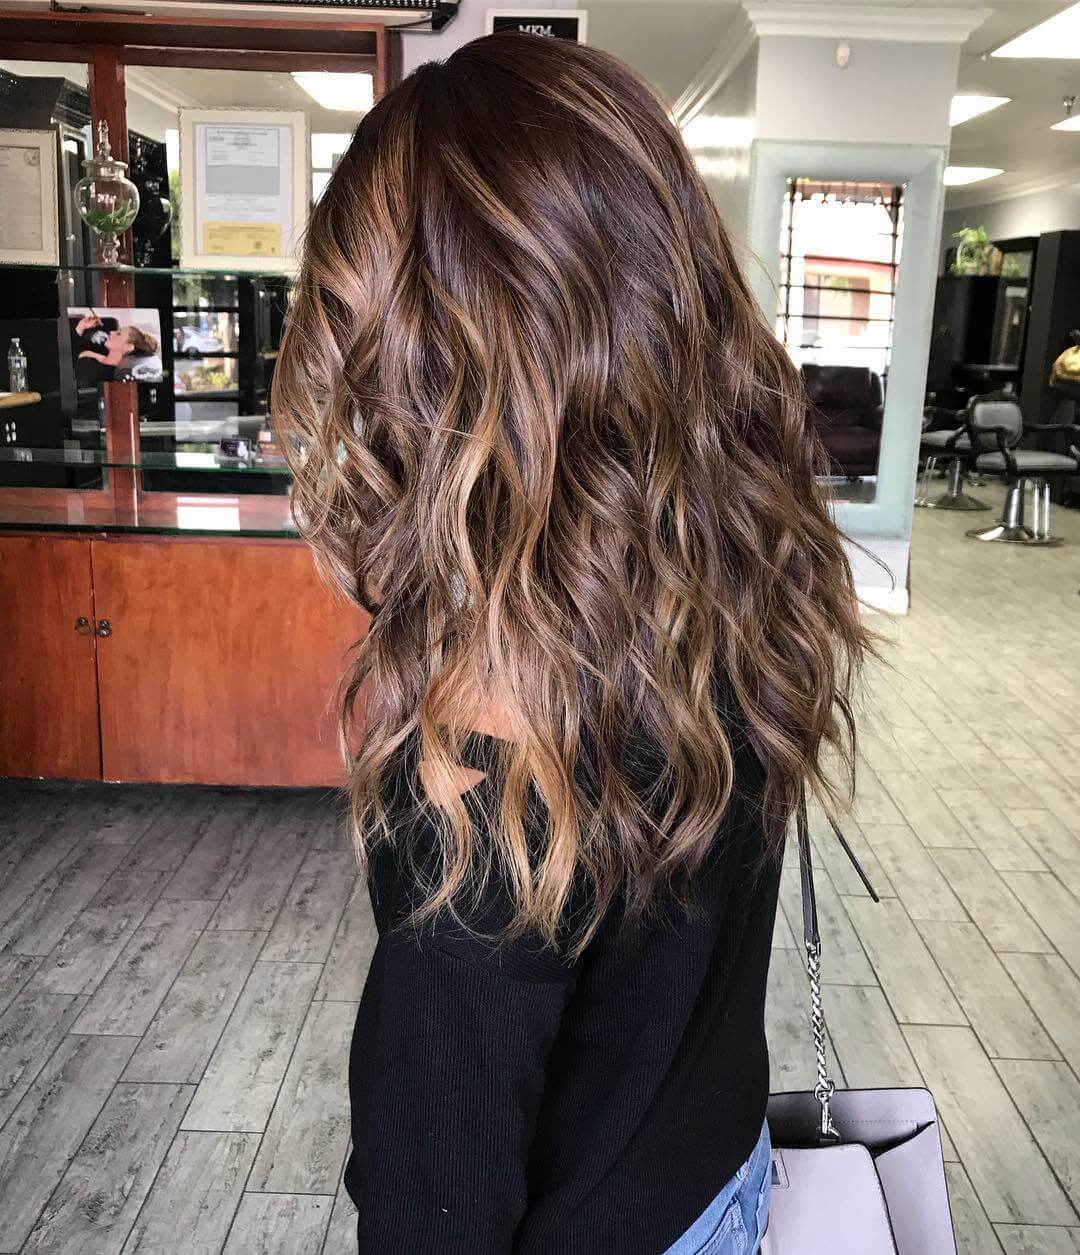 Long layers in chestnut to caramel balayage, echoing the glow of a winter fireplace.